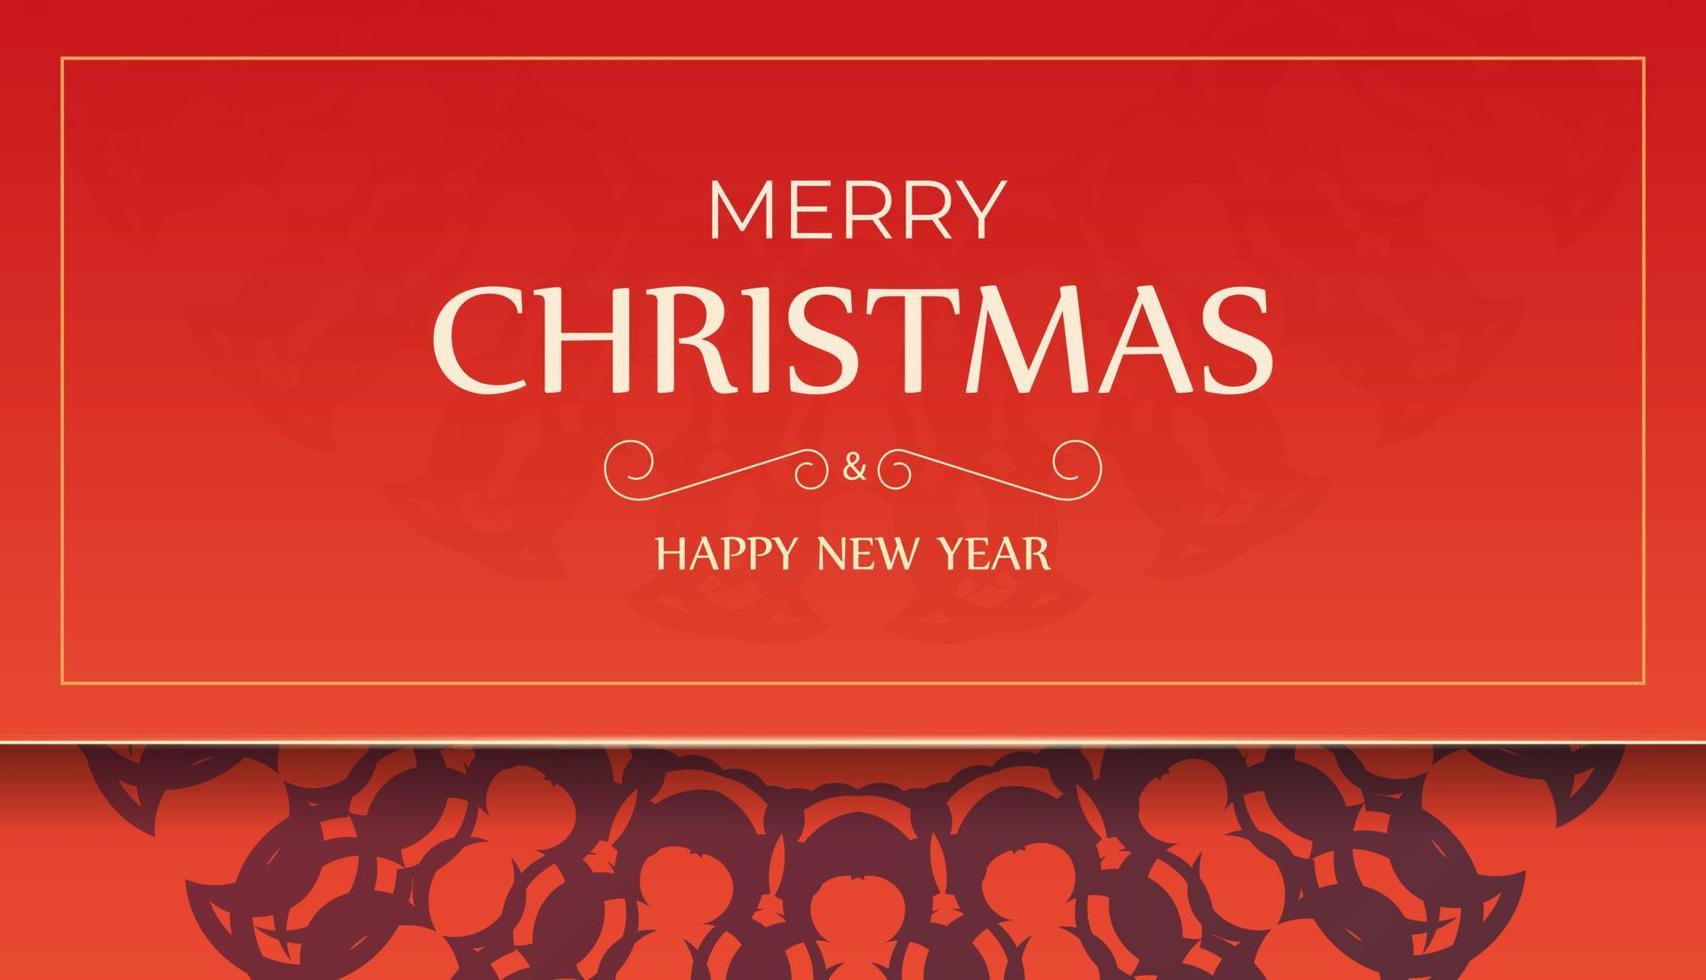 Greeting Flyer Template Merry Christmas and Happy New Year Red Color with Vintage Burgundy Ornament vector